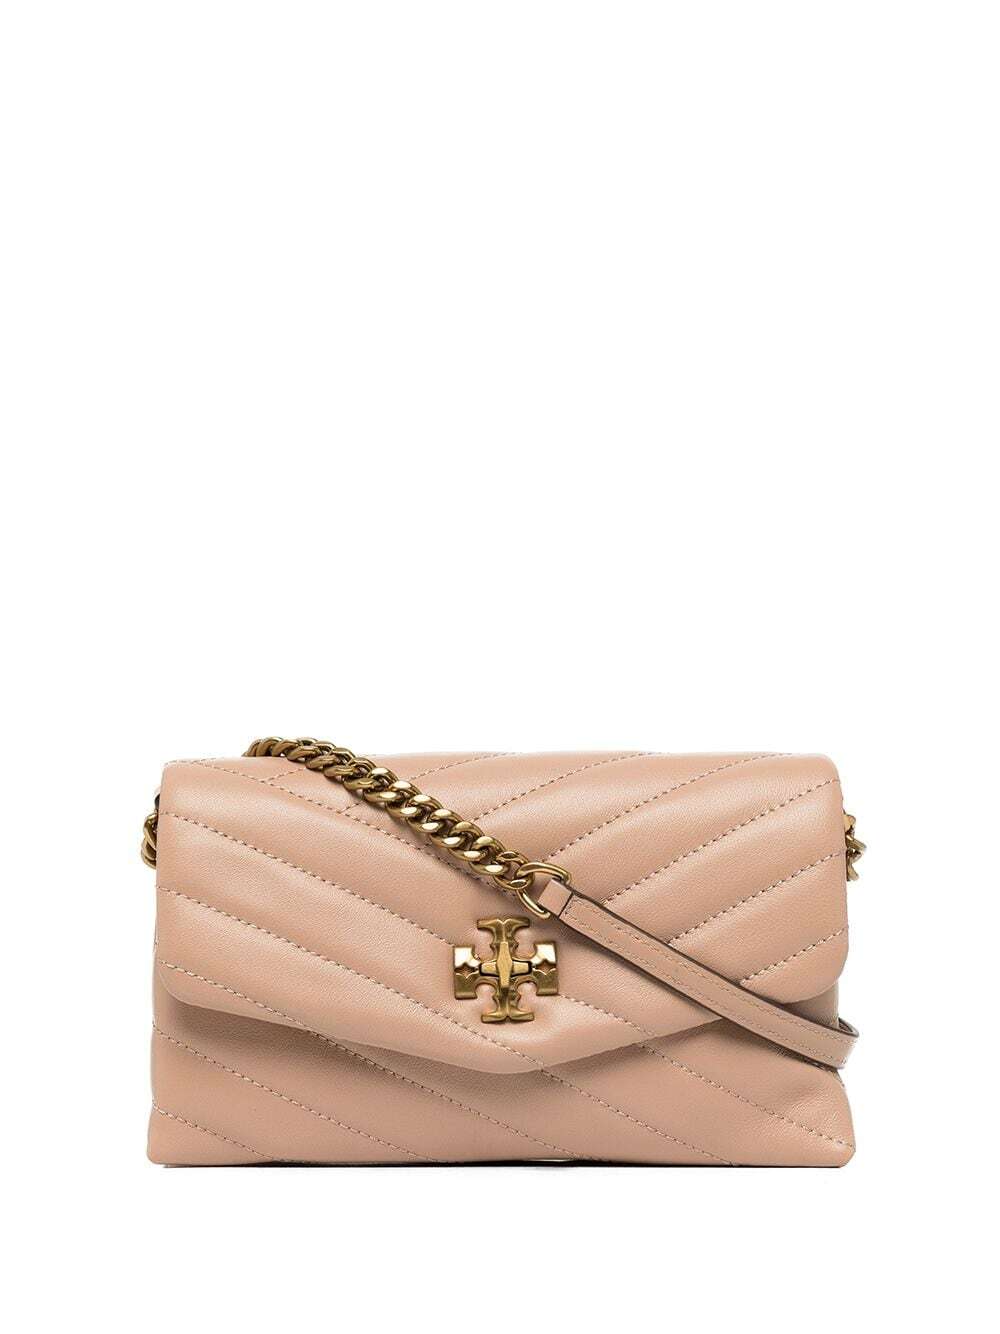 Tory Burch Kira quilted bag - Pink